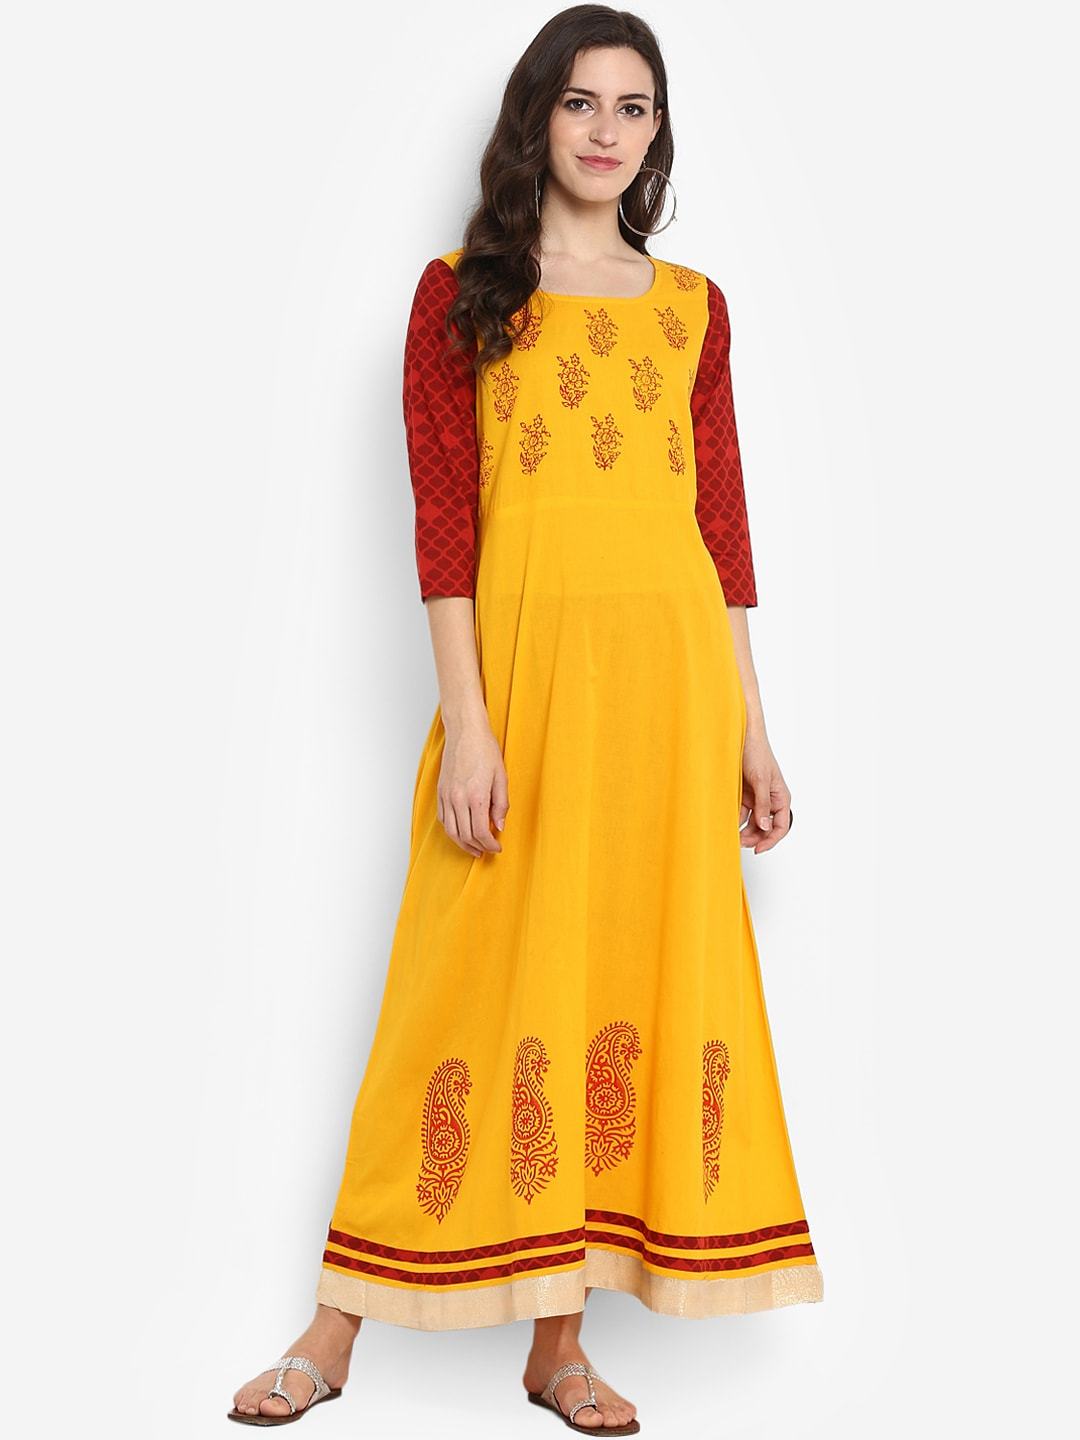 Women's Mustard Yellow Printed Fit and Flare Dress - Meeranshi